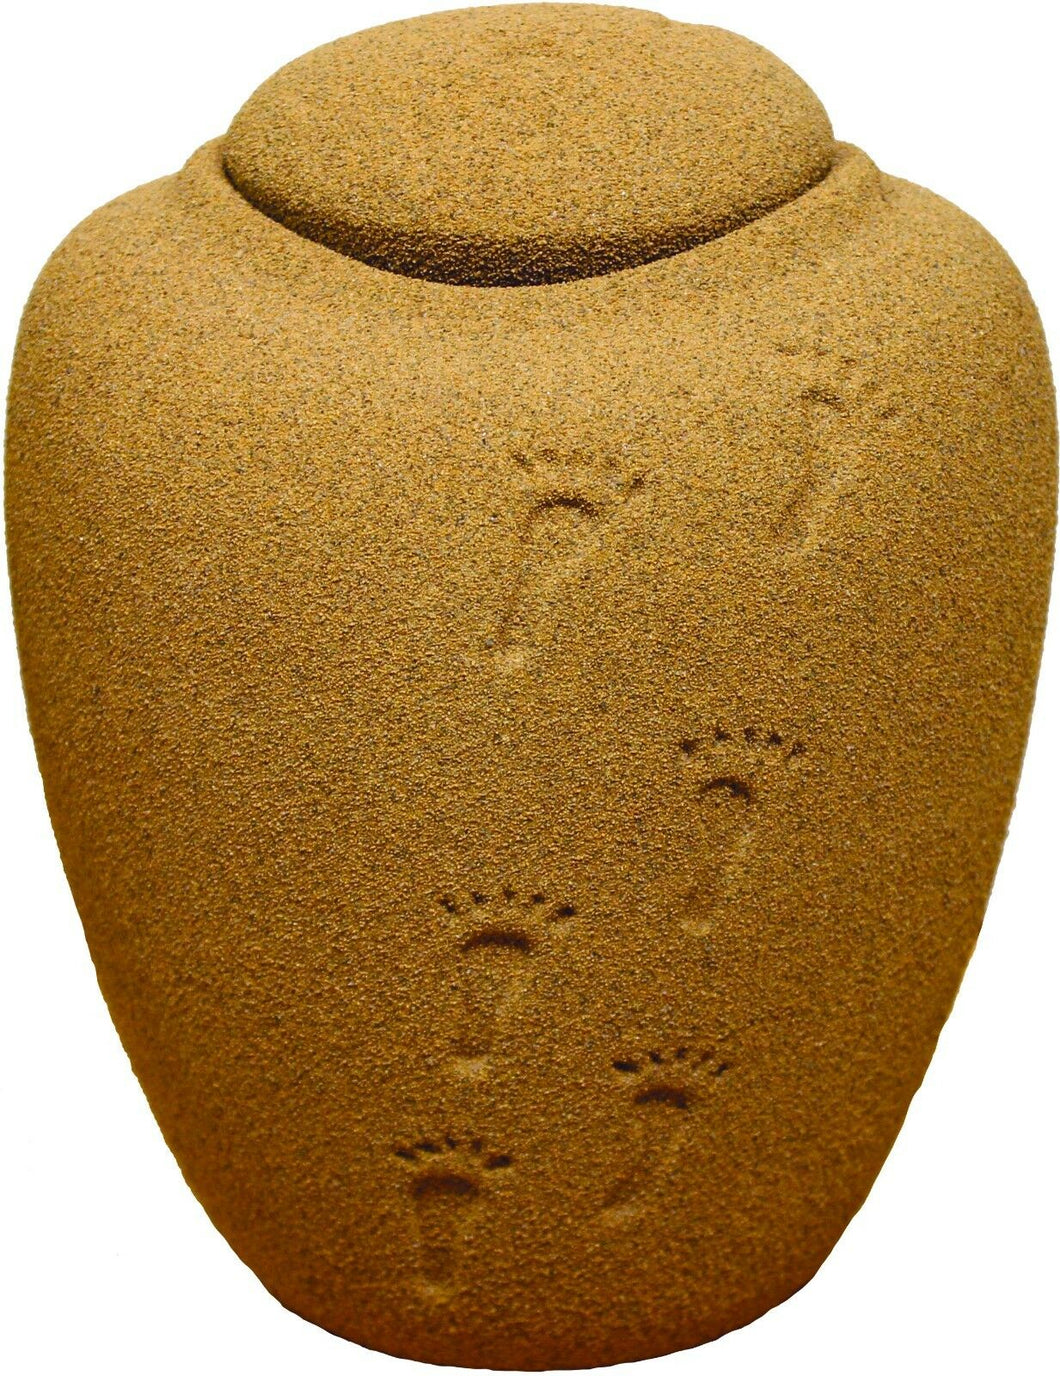 Adult/Large Oceane Permanent Sand and Gelatin Funeral Cremation Urn For Ashes